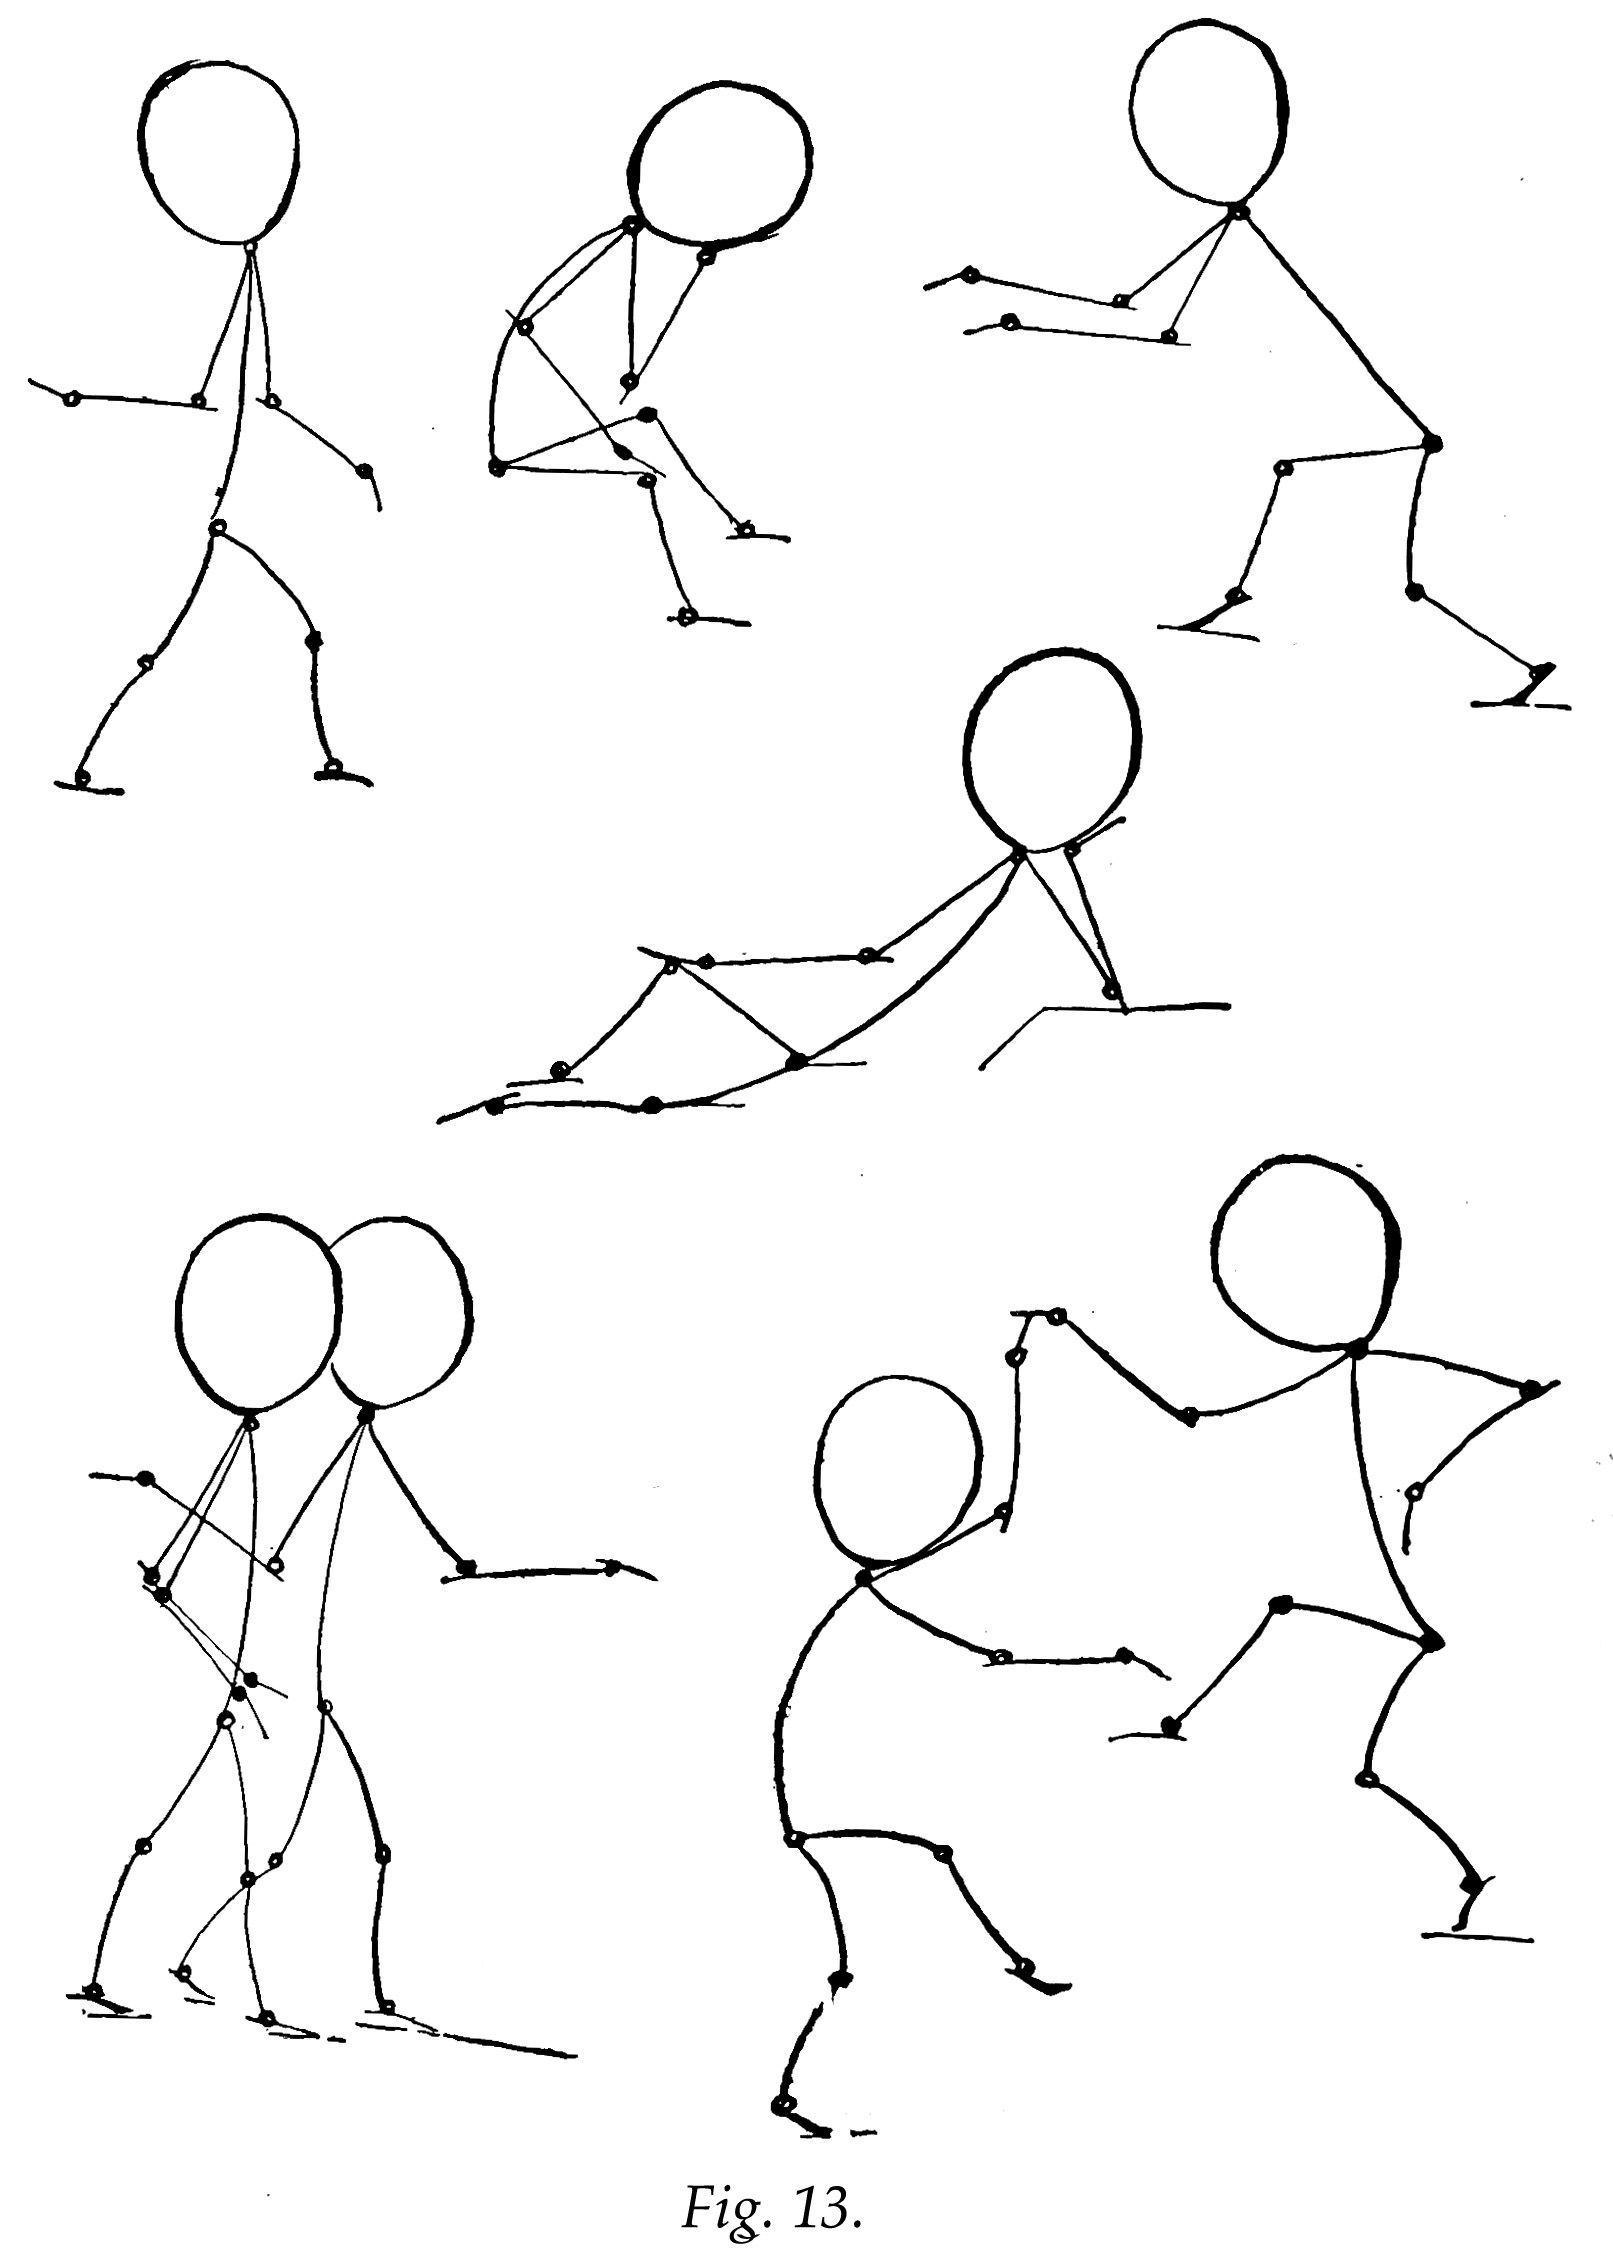  How To Draw Stick People  The ultimate guide 